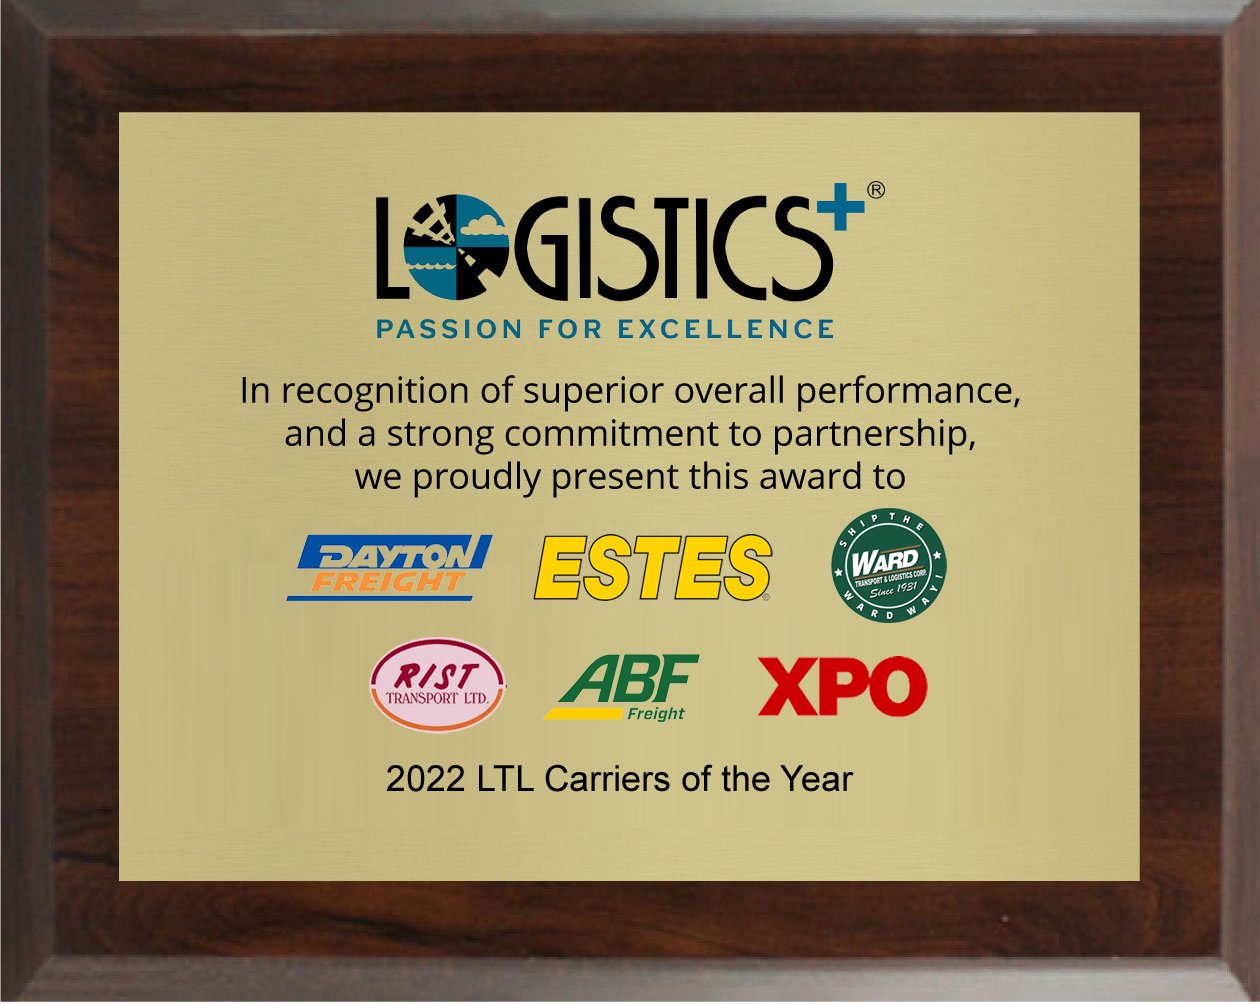 All 2022 LTL Carriers of the Year